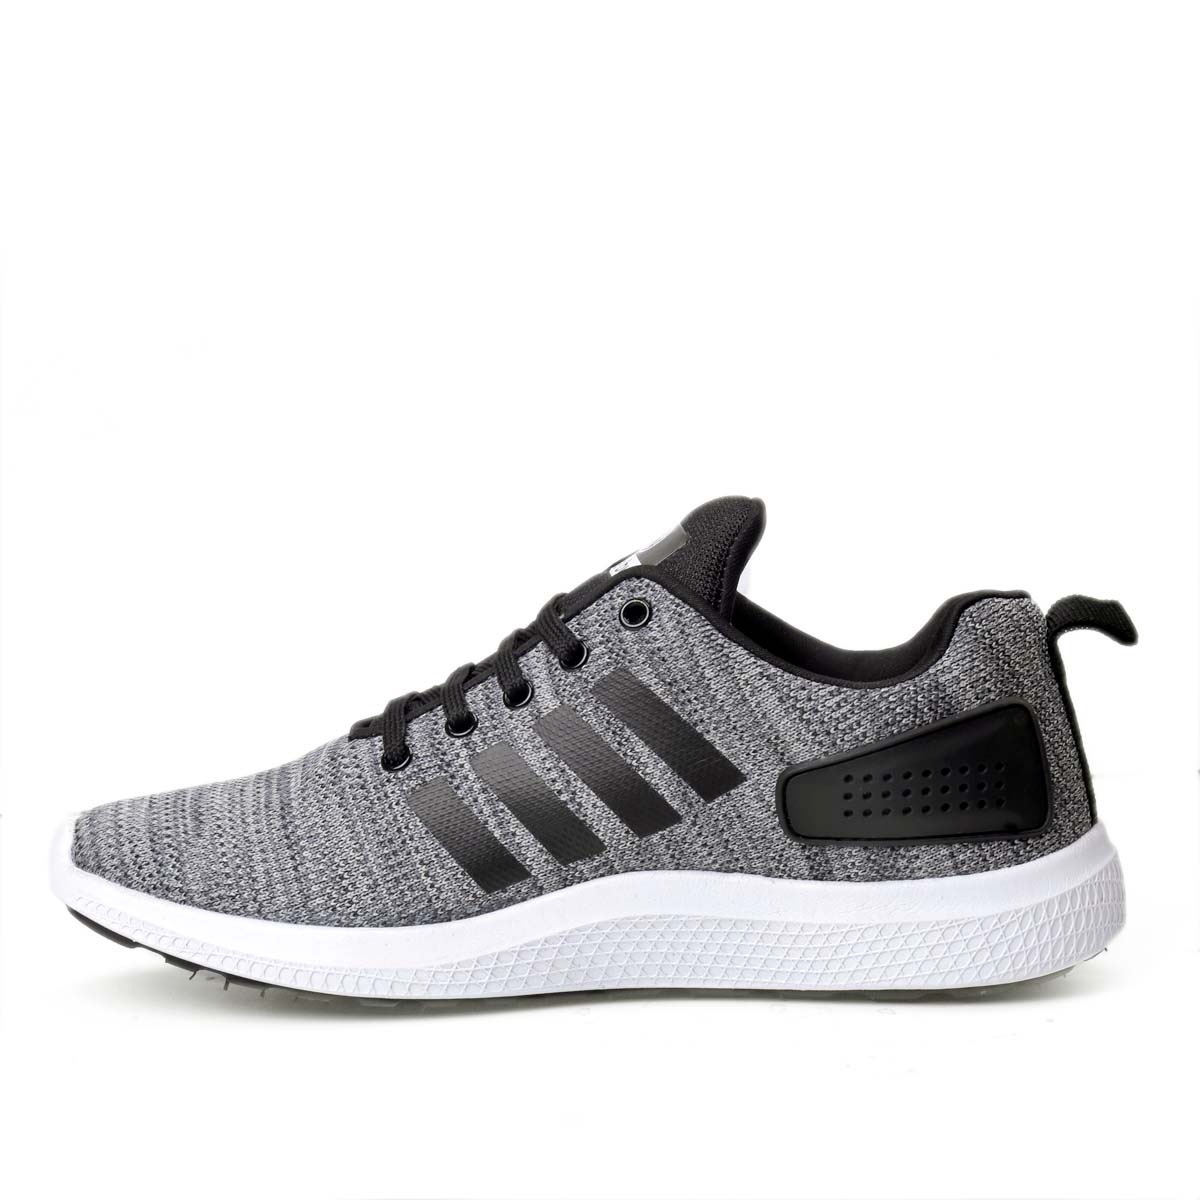 Bacca Bucci Mens Trainers Athletic Jogging fitness Sports Shoes/sneakers